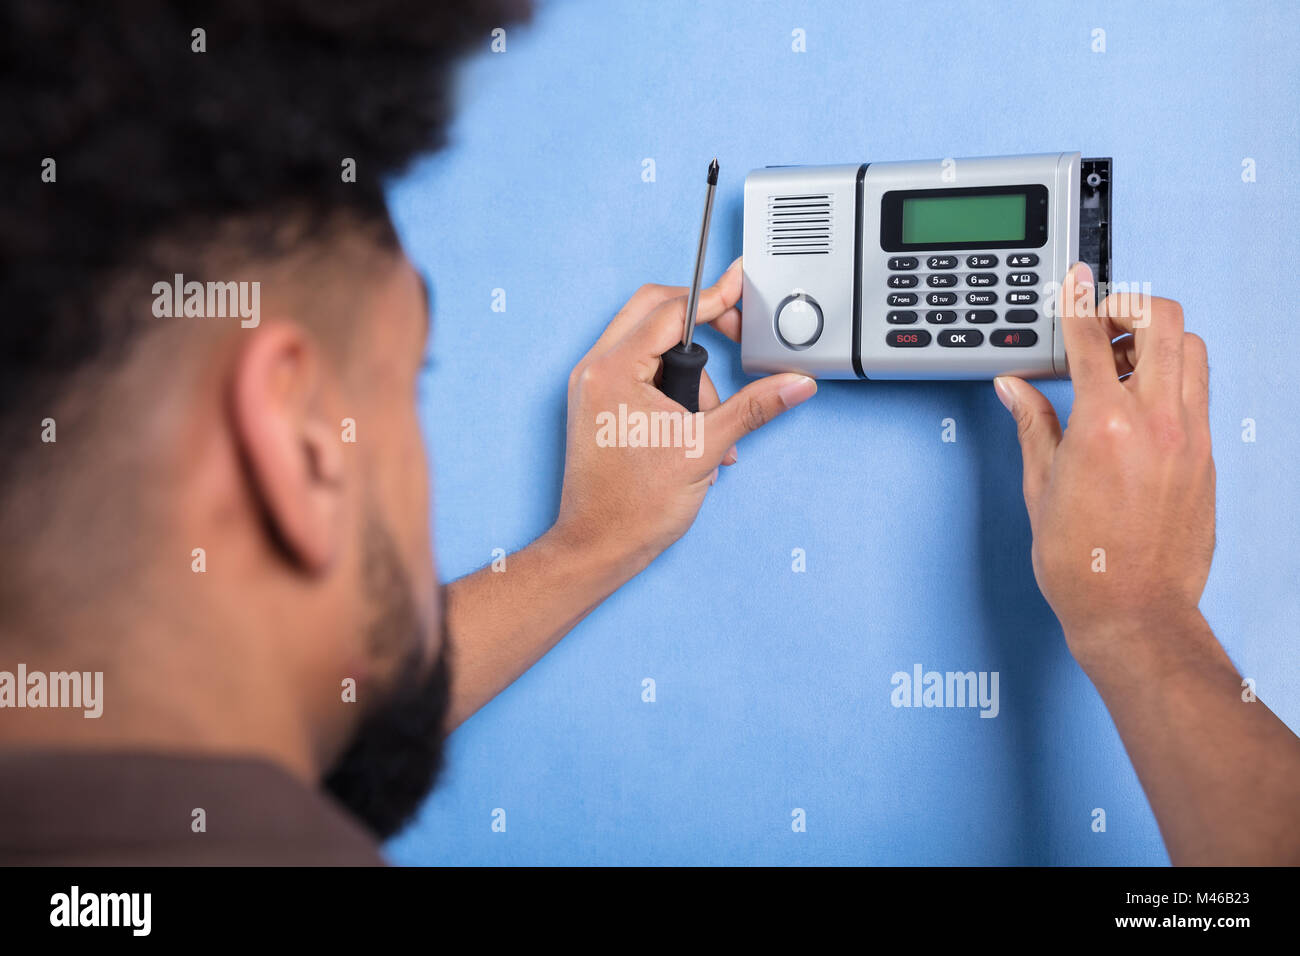 Close-up Of A Man Installing Security System On Blue Wall Stock Photo